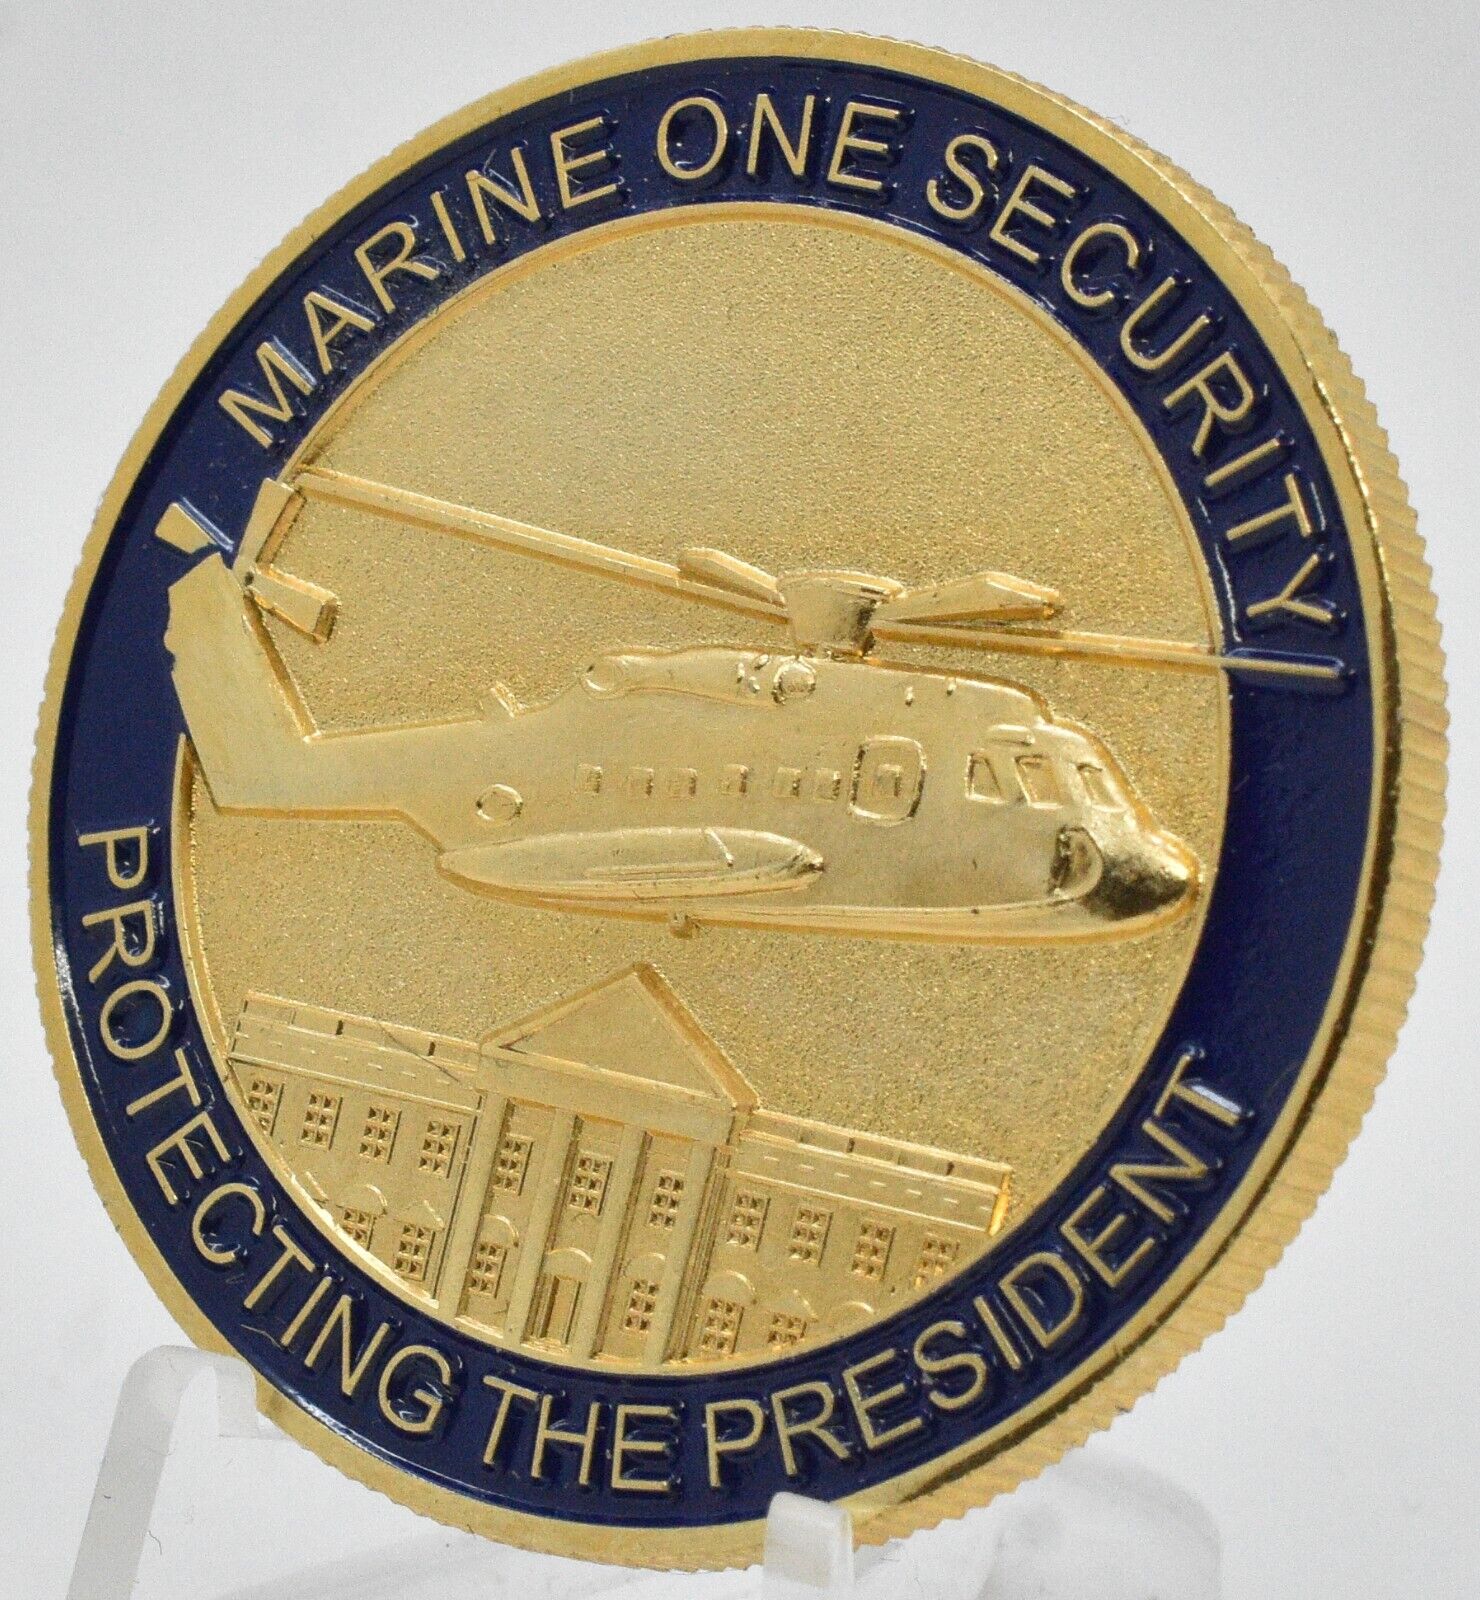 HMX-1 Marine One Security USMC WHITE HOUSE HELICOPTER CHALLENGE COIN